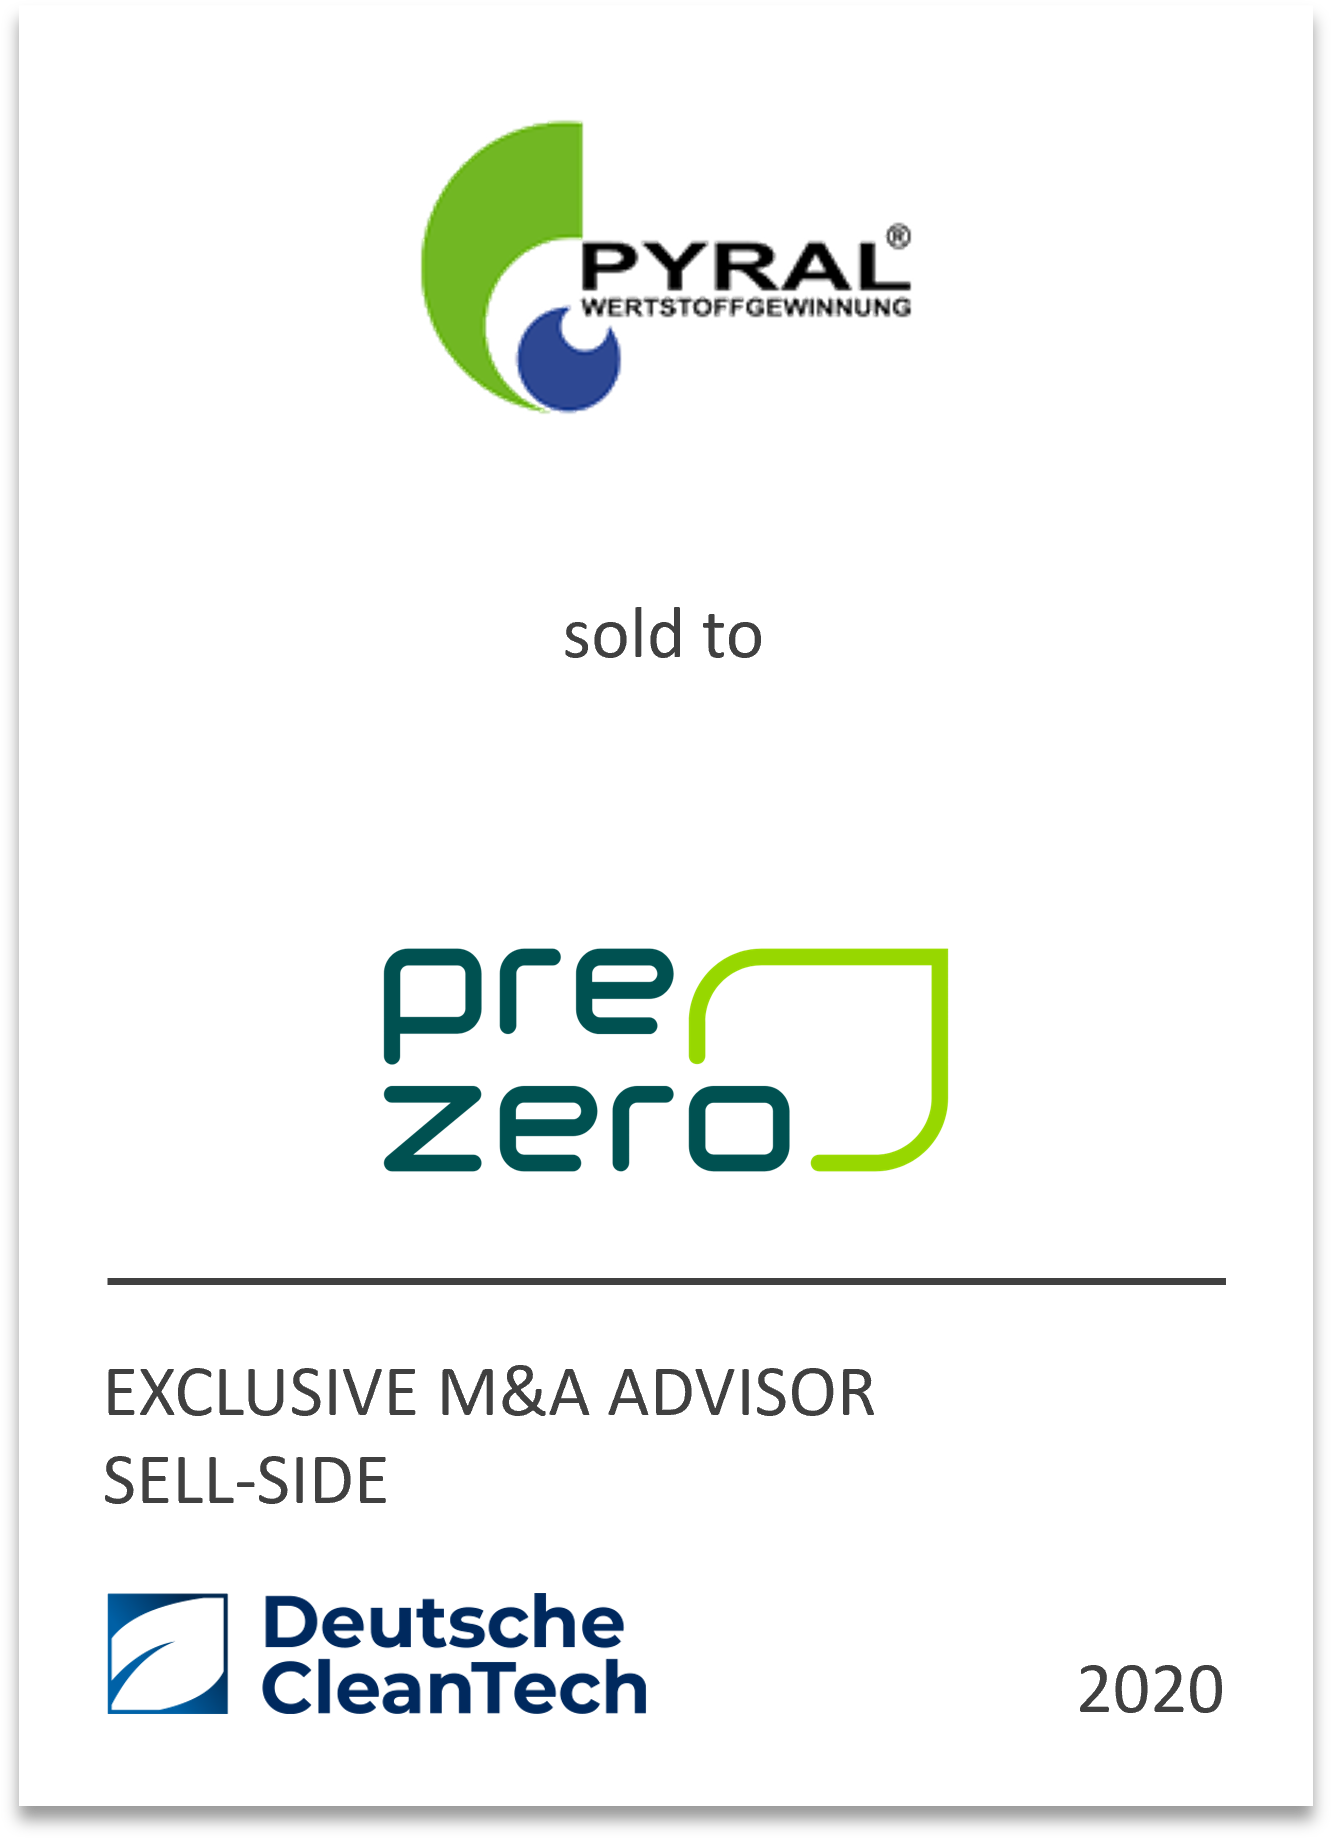 PreZero Group, an environmental service provider and recycling company, has acquired a 60% stake in Pyral AG